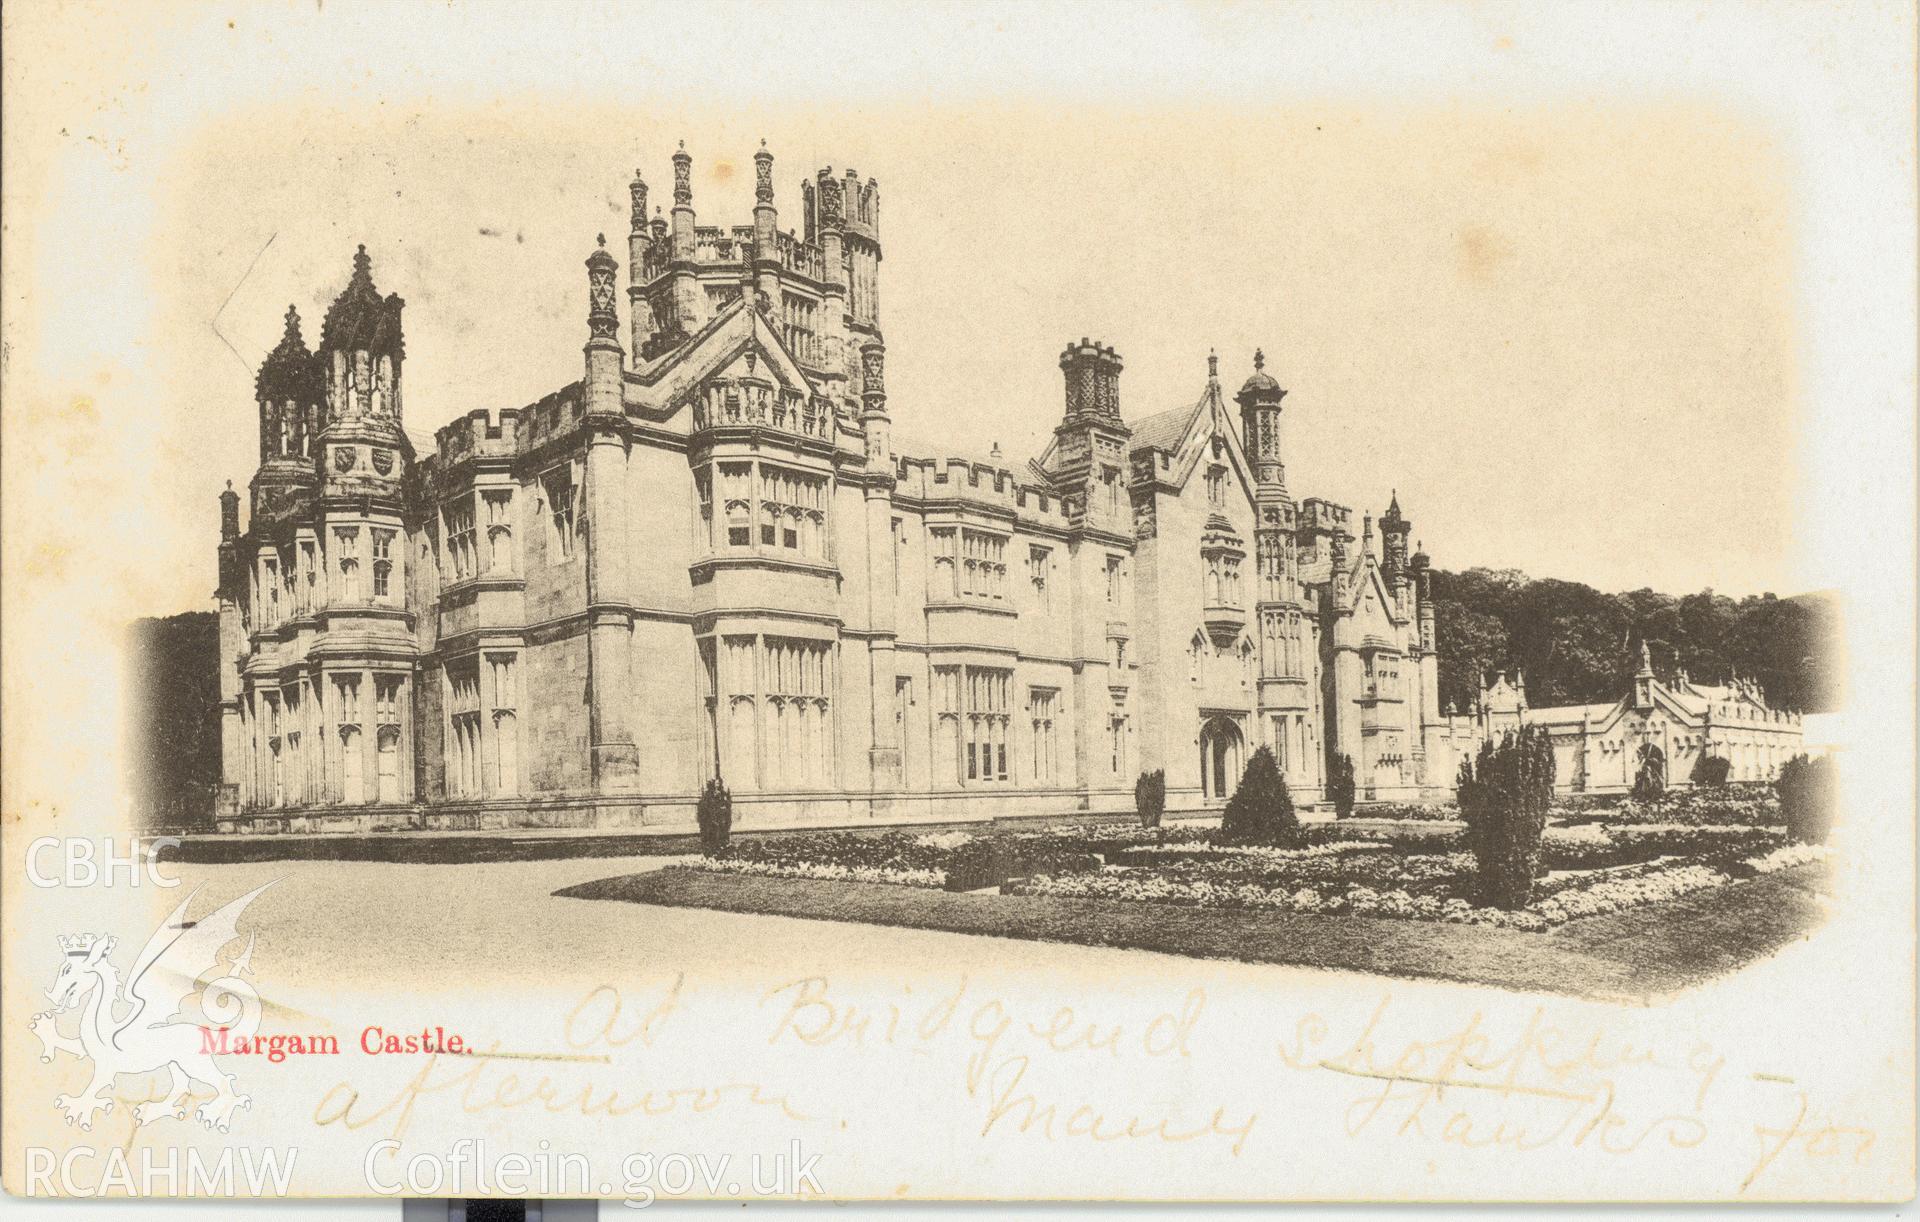 Digitised postcard image of Margam Castle. Produced by Parks and Gardens Data Services, from an original item in the Peter Davis Collection at Parks and Gardens UK. We hold only web-resolution images of this collection, suitable for viewing on screen and for research purposes only. We do not hold the original images, or publication quality scans.